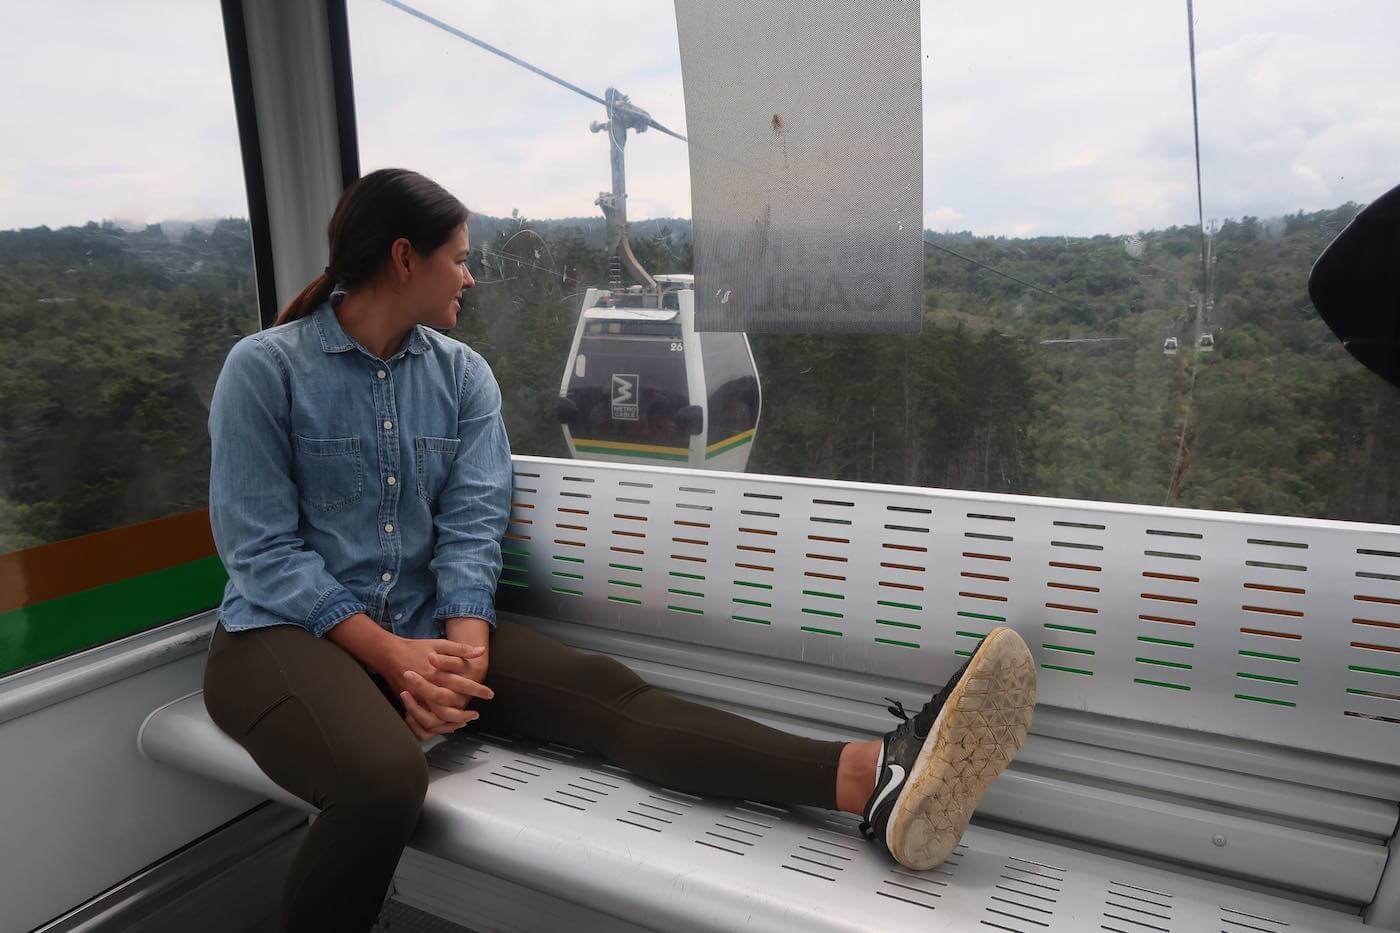 Kim sitting in Metrocable over Parque Arvi